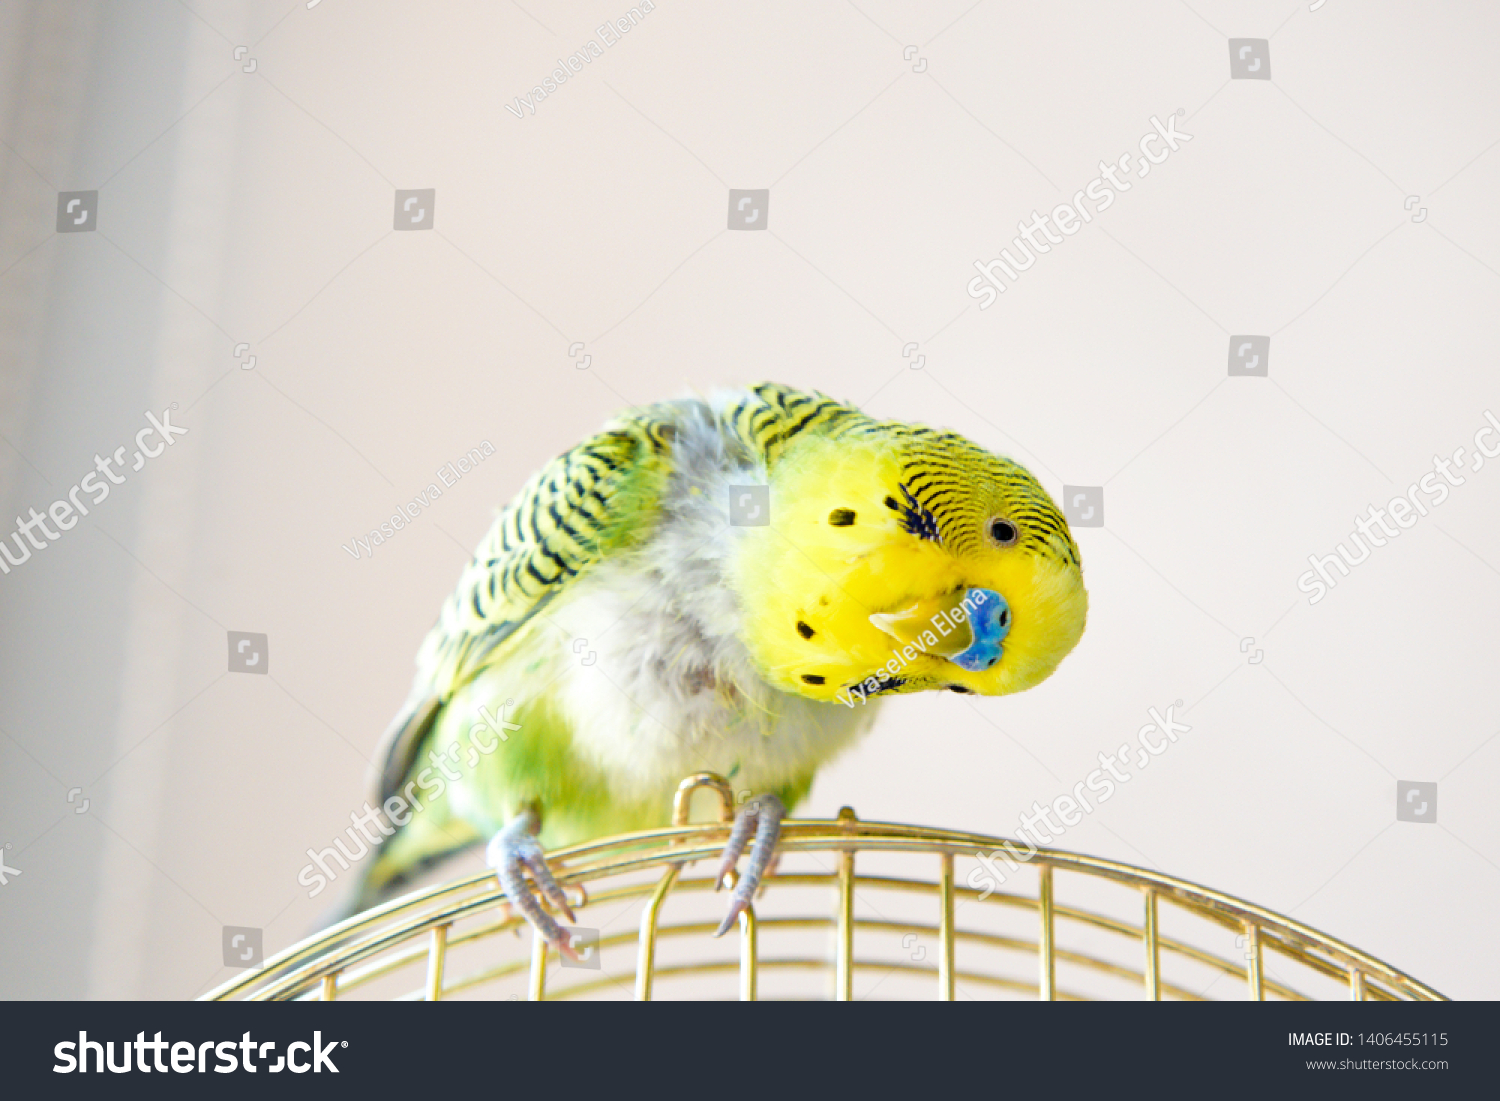 Domestic budgy parrot on cage, poultry with a health problem after moulting. A green Budgerigar with plucked breast, without feathers. #1406455115